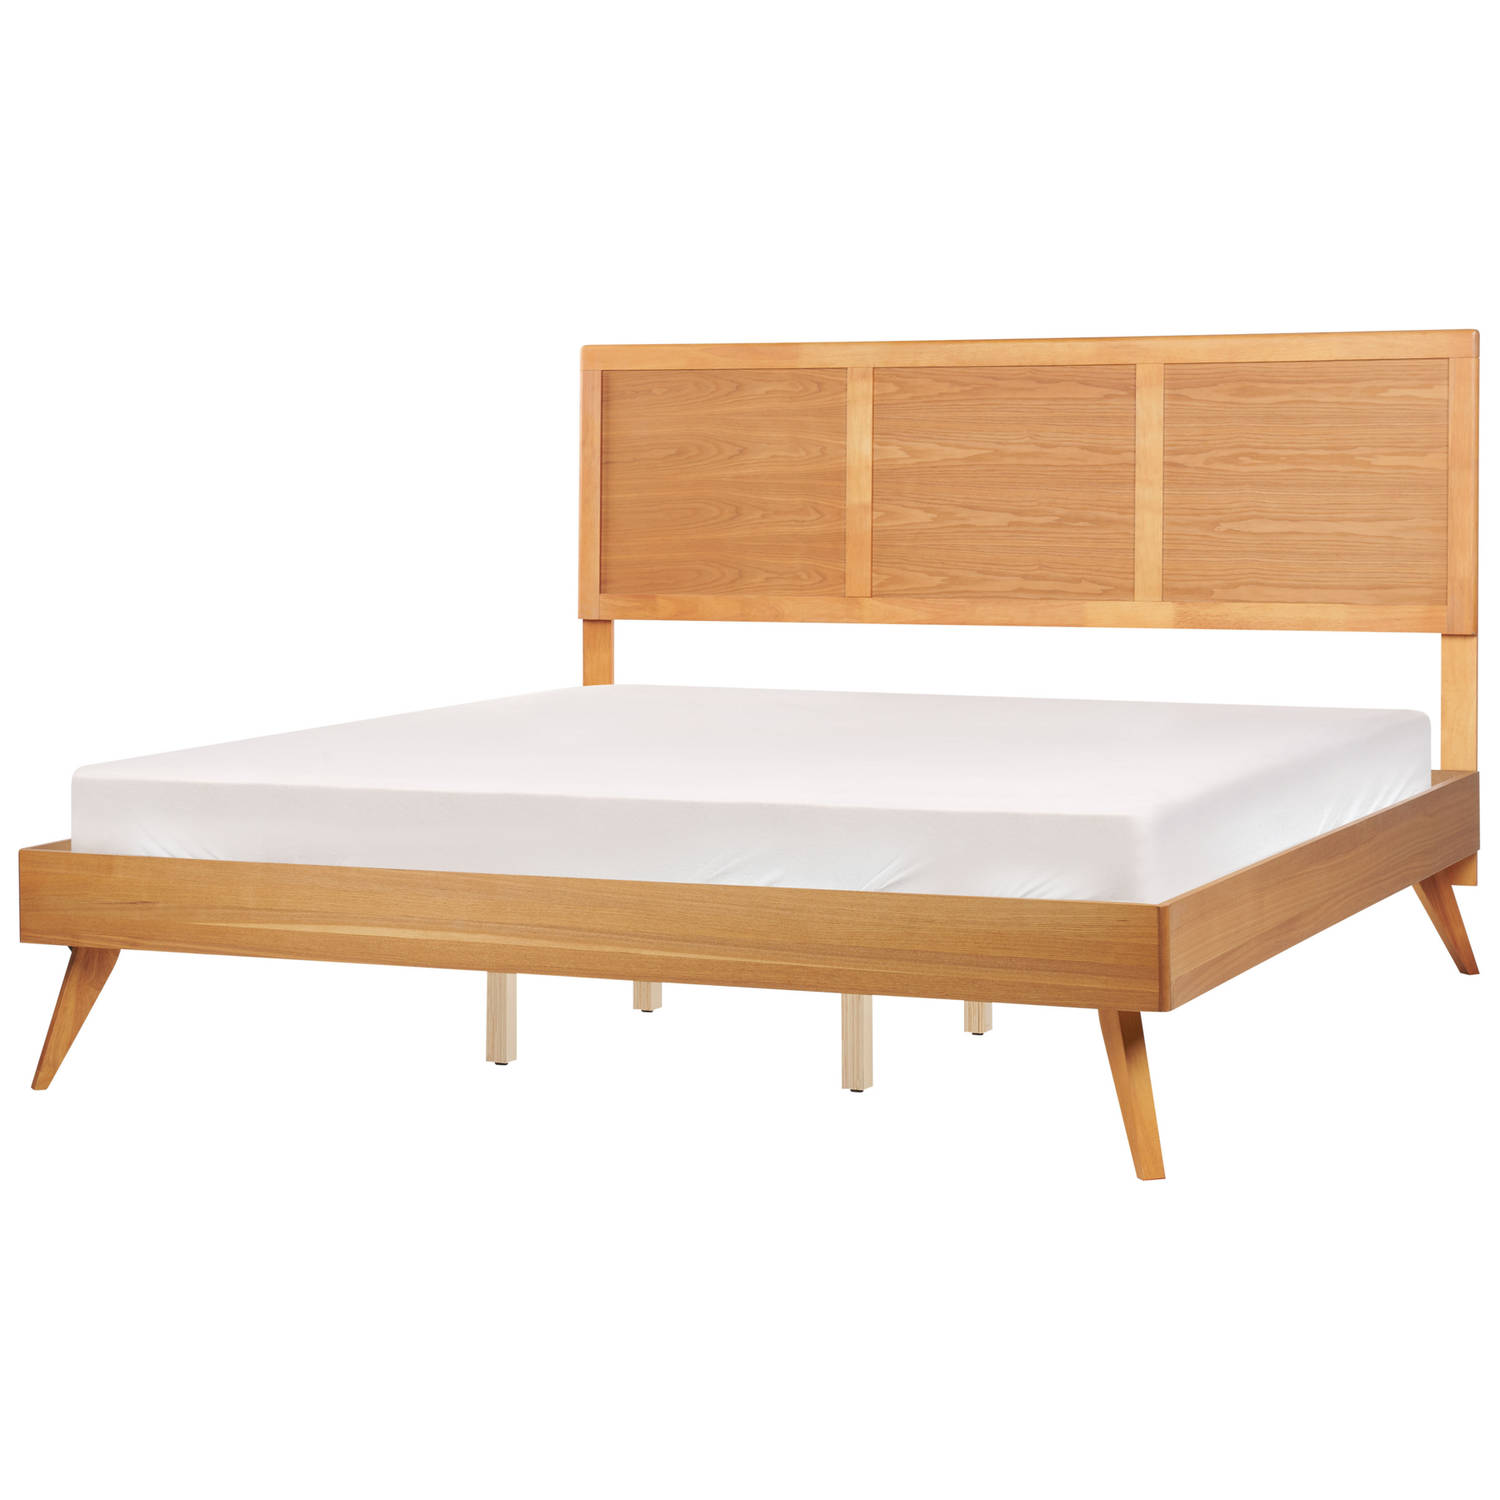 ISTRES - Tweepersoonsbed - Lichthout - 180 x 200 cm - MDF